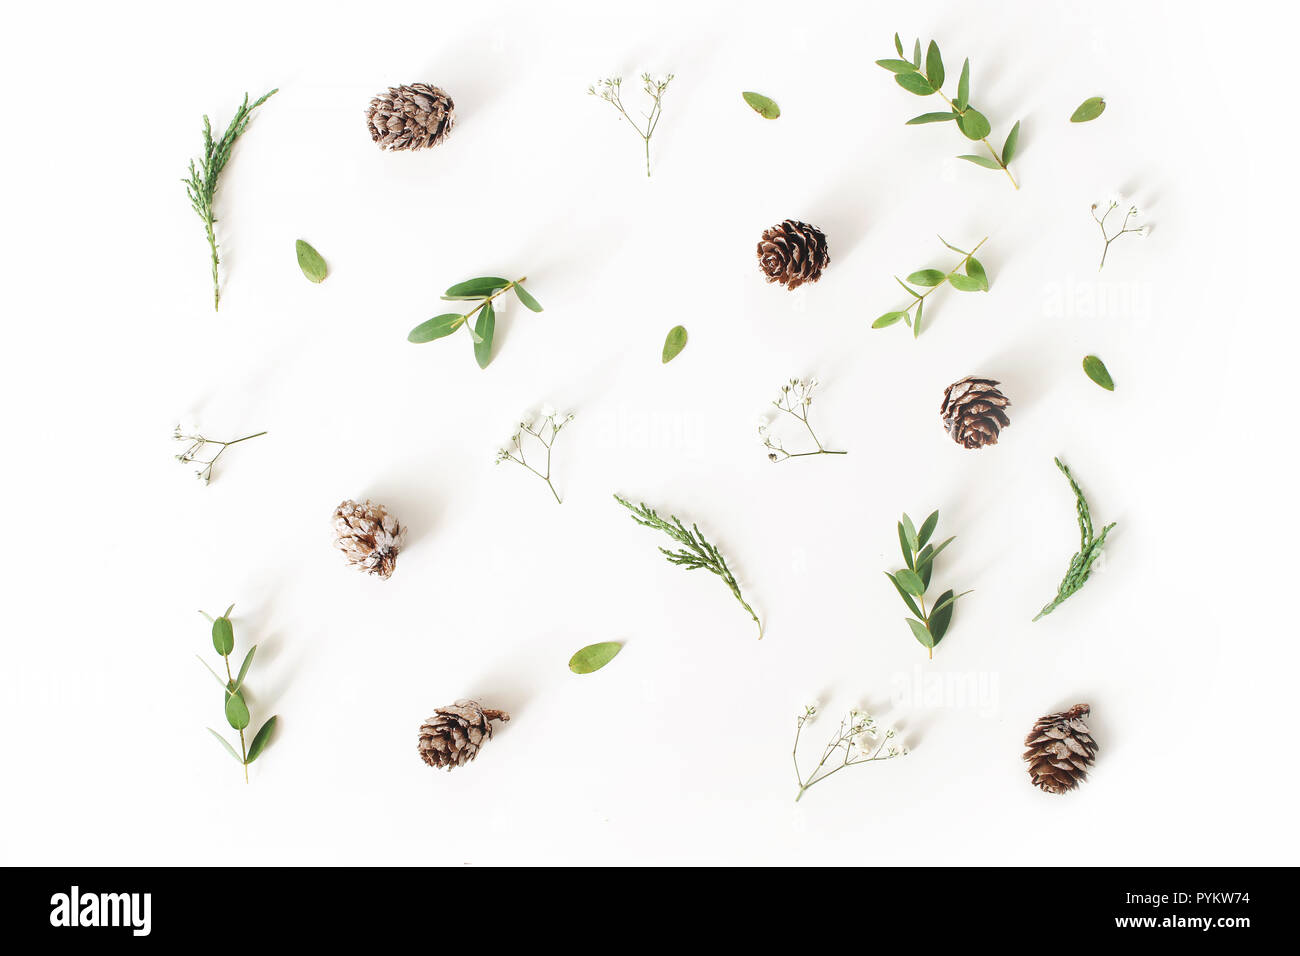 Christmas floral pattern. Winter composition of eucalyptus leaves and branches, larch cones and baby's breath flowers on white table background. Flat lay, top view. Stock Photo